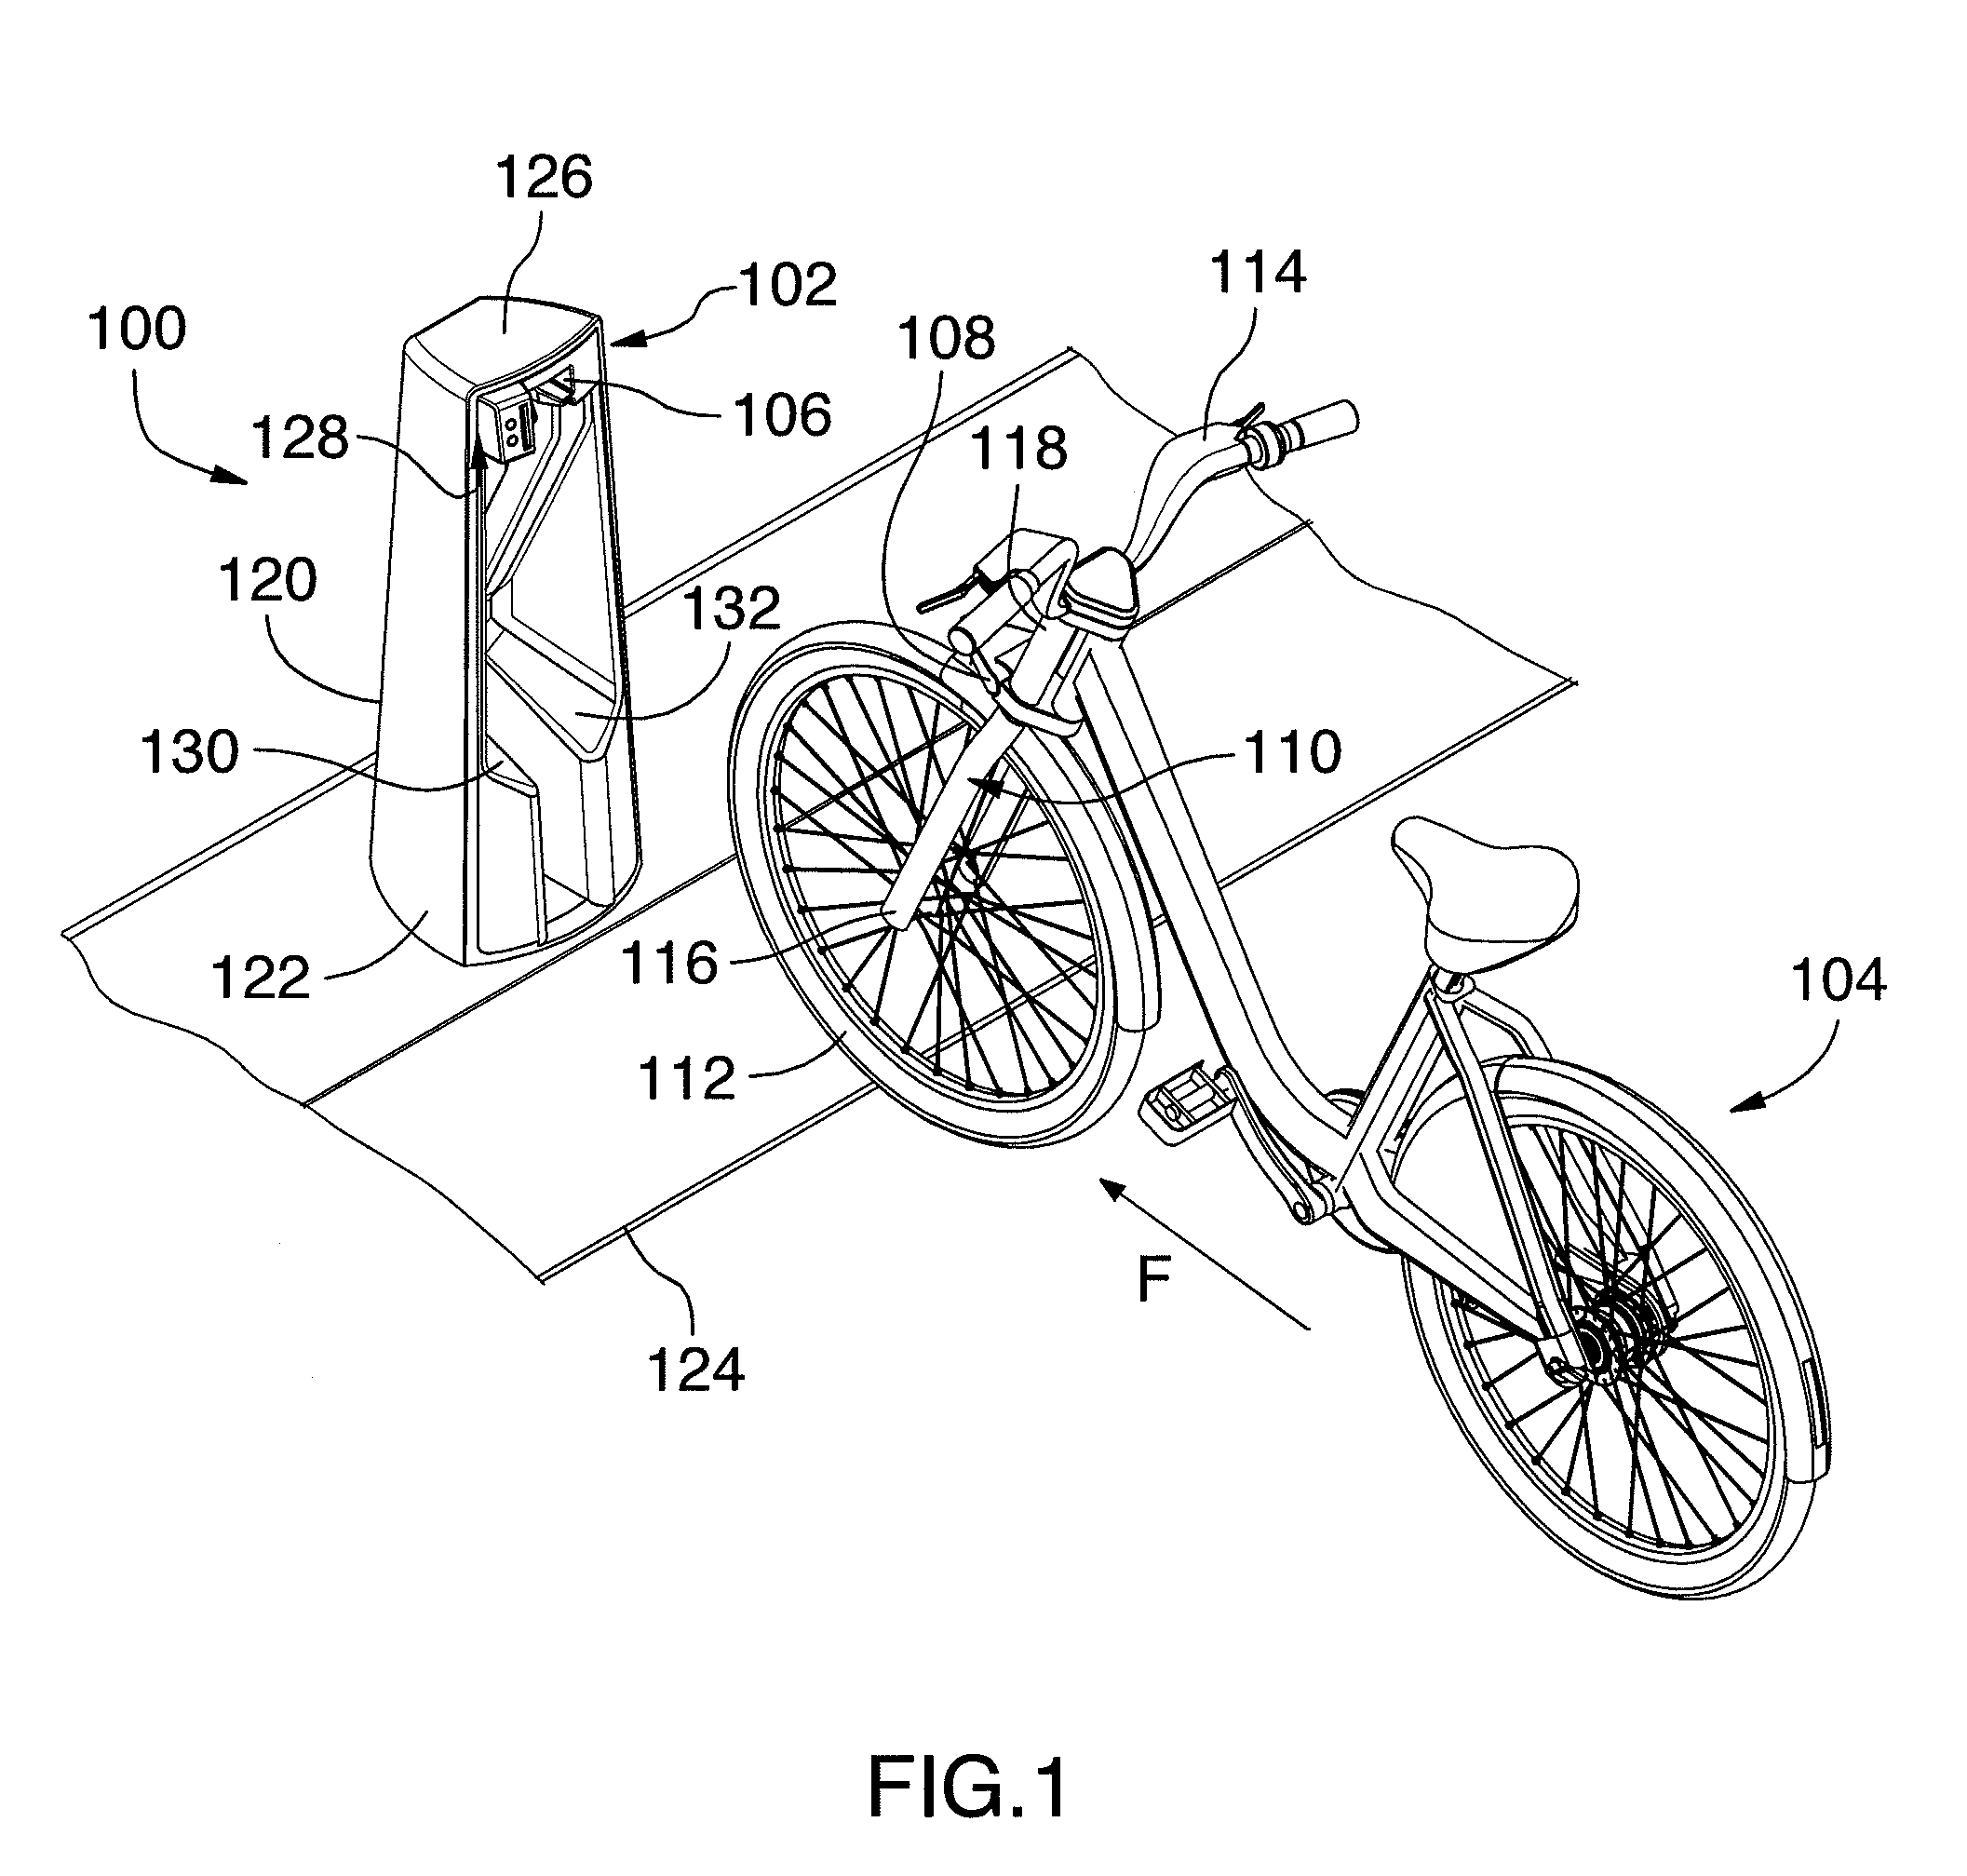 Method and apparatus for securing a movable item to a structure